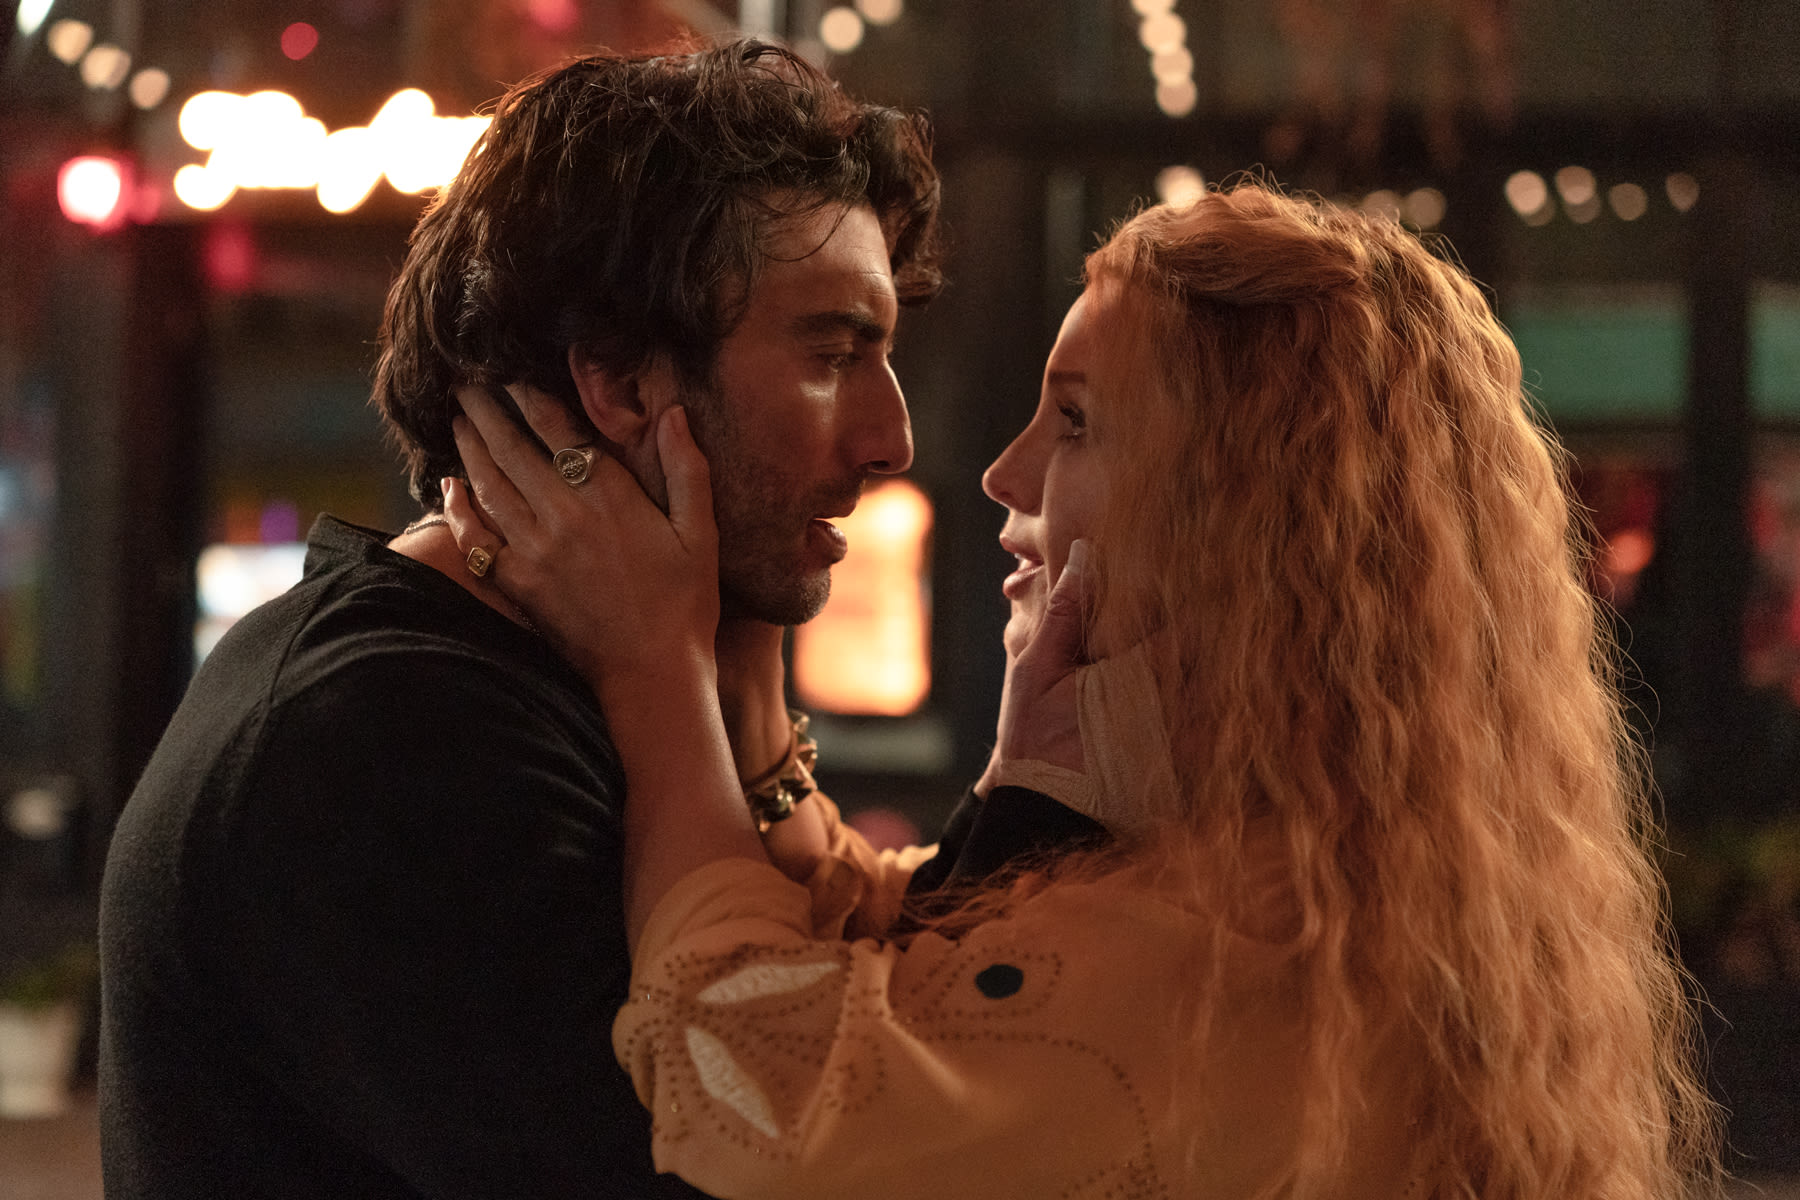 Old Flames and Bad Habits Unravel Blake Lively’s Fairytale Romance in ‘It Ends With Us’ Trailer